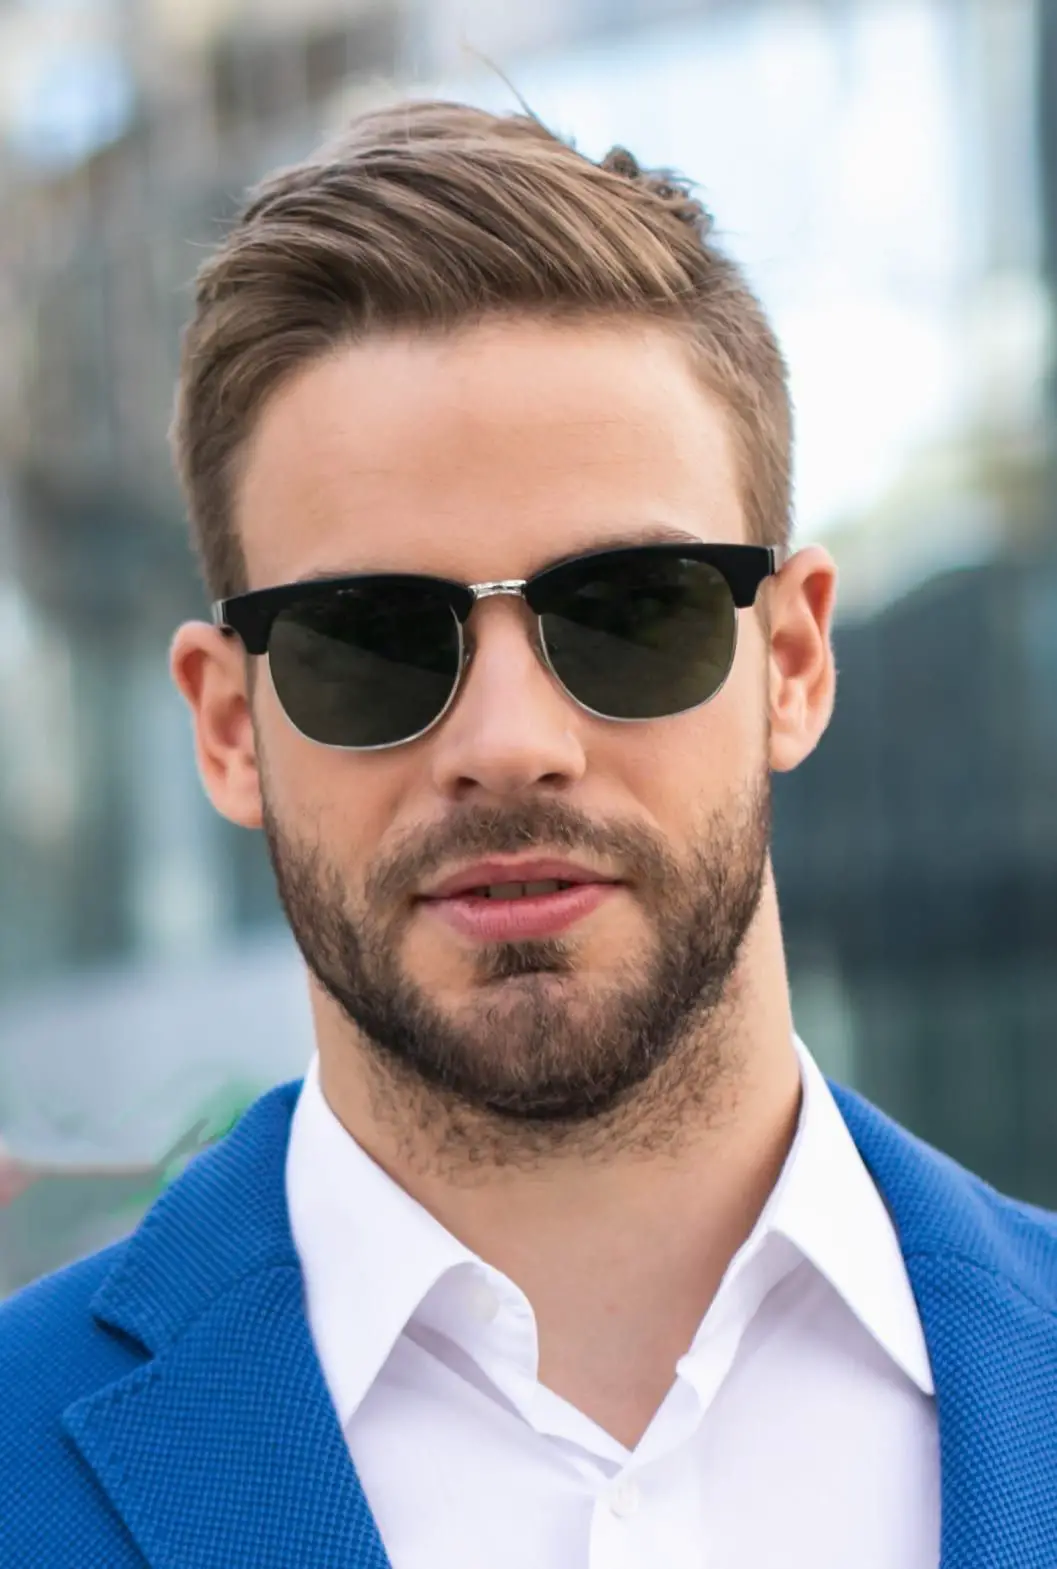 50 Classic Side Part Haircuts For Men Trending This Year Textured Quiff 